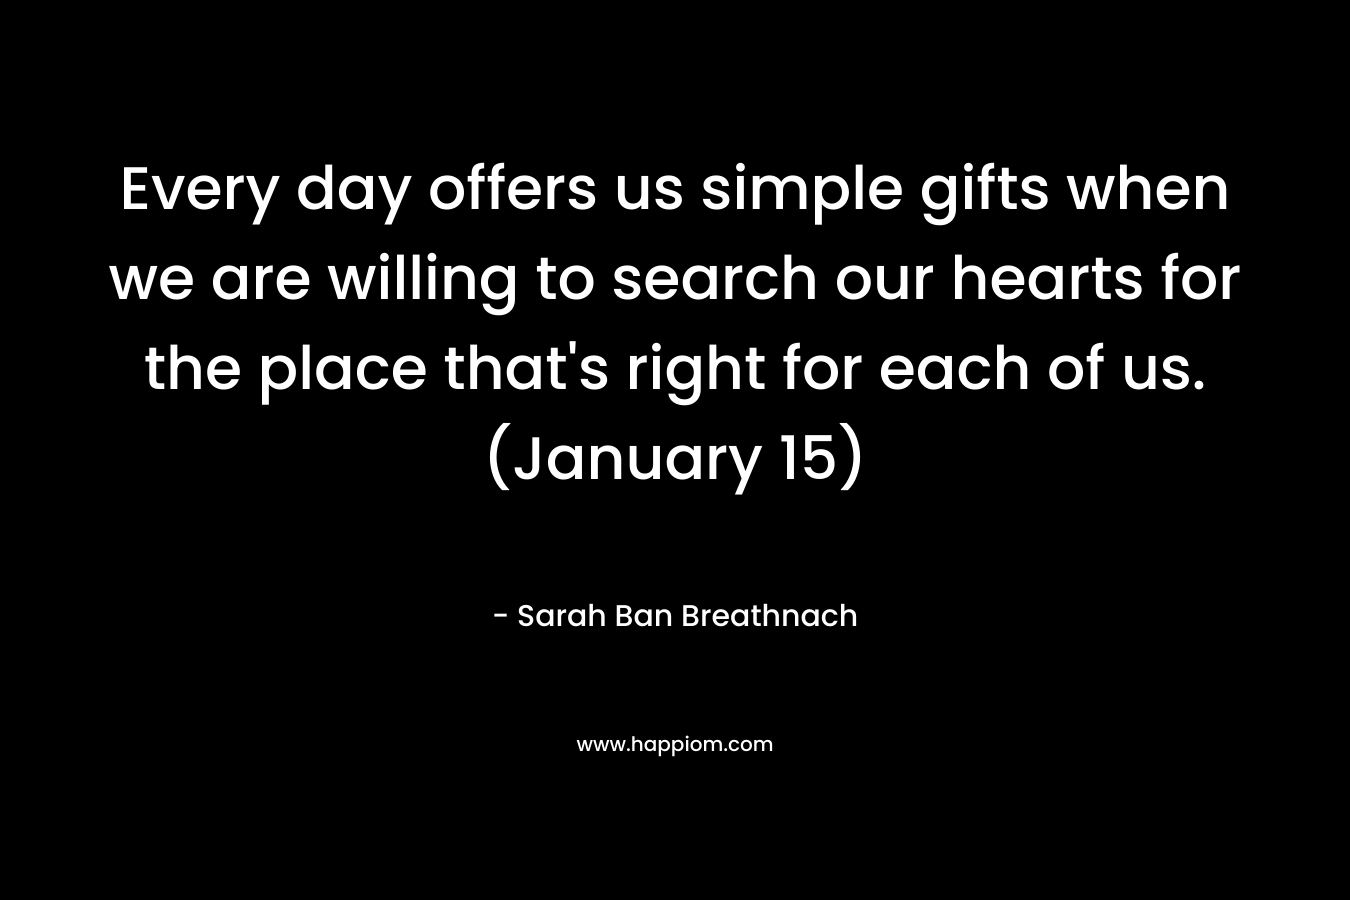 Every day offers us simple gifts when we are willing to search our hearts for the place that's right for each of us. (January 15)